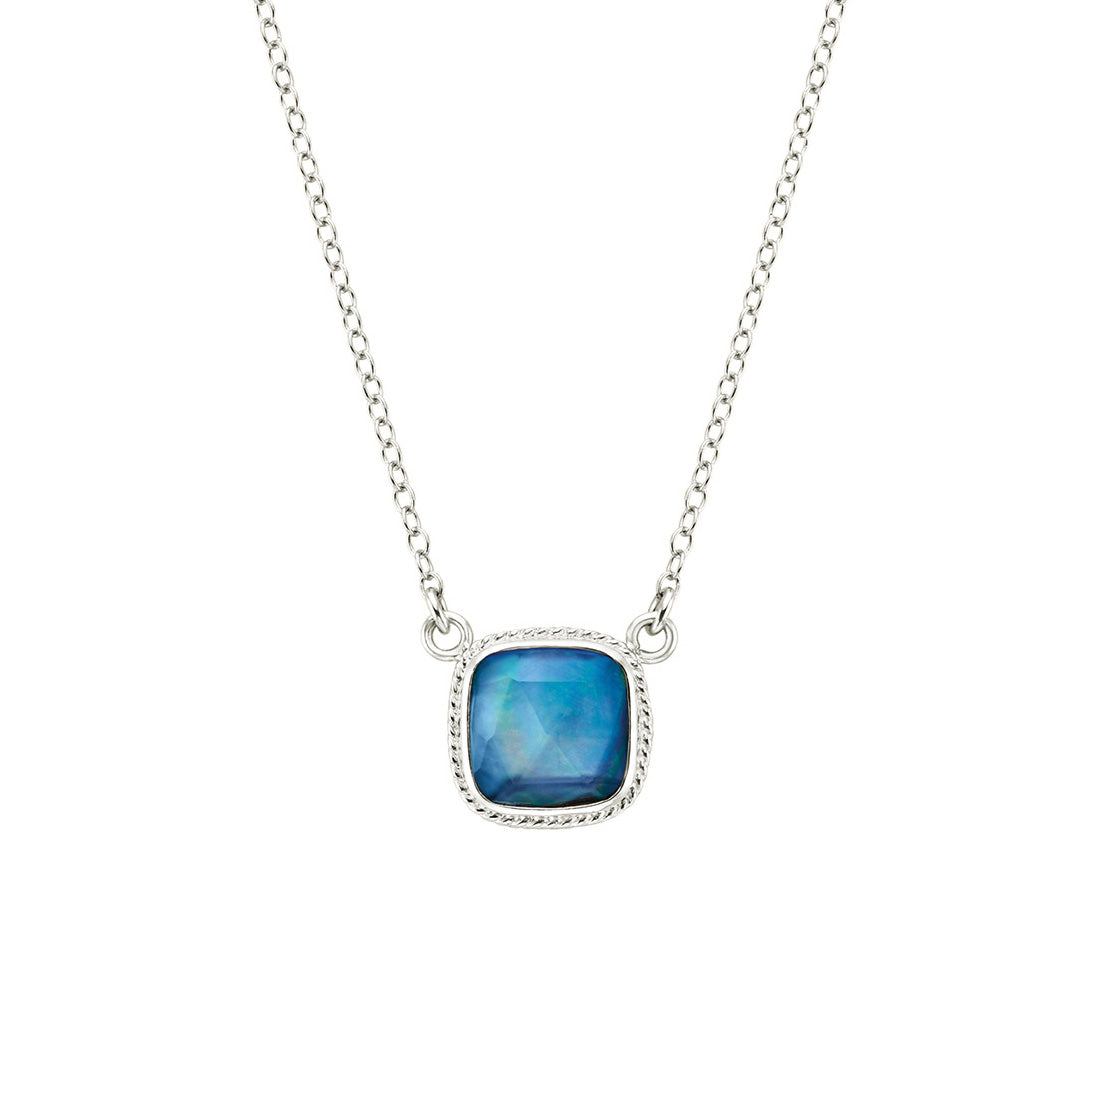 Ana Beck Sterling Silver Lapis Square Drop Necklace - Silver